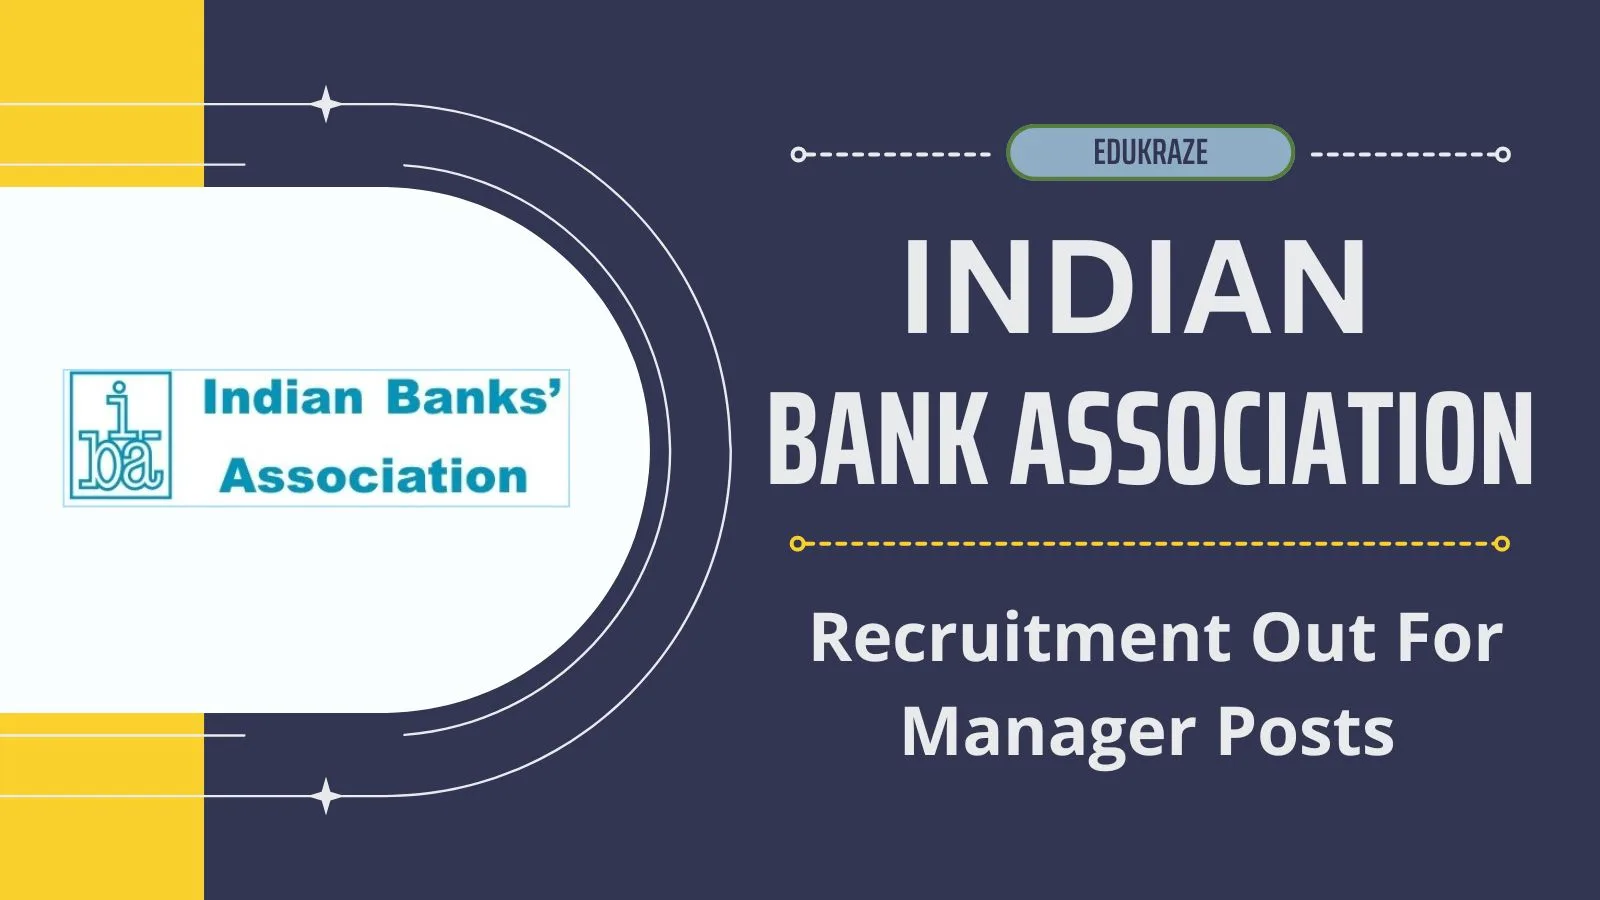 Indian Banks Association (IBA) Recruitment Out, Apply Now!